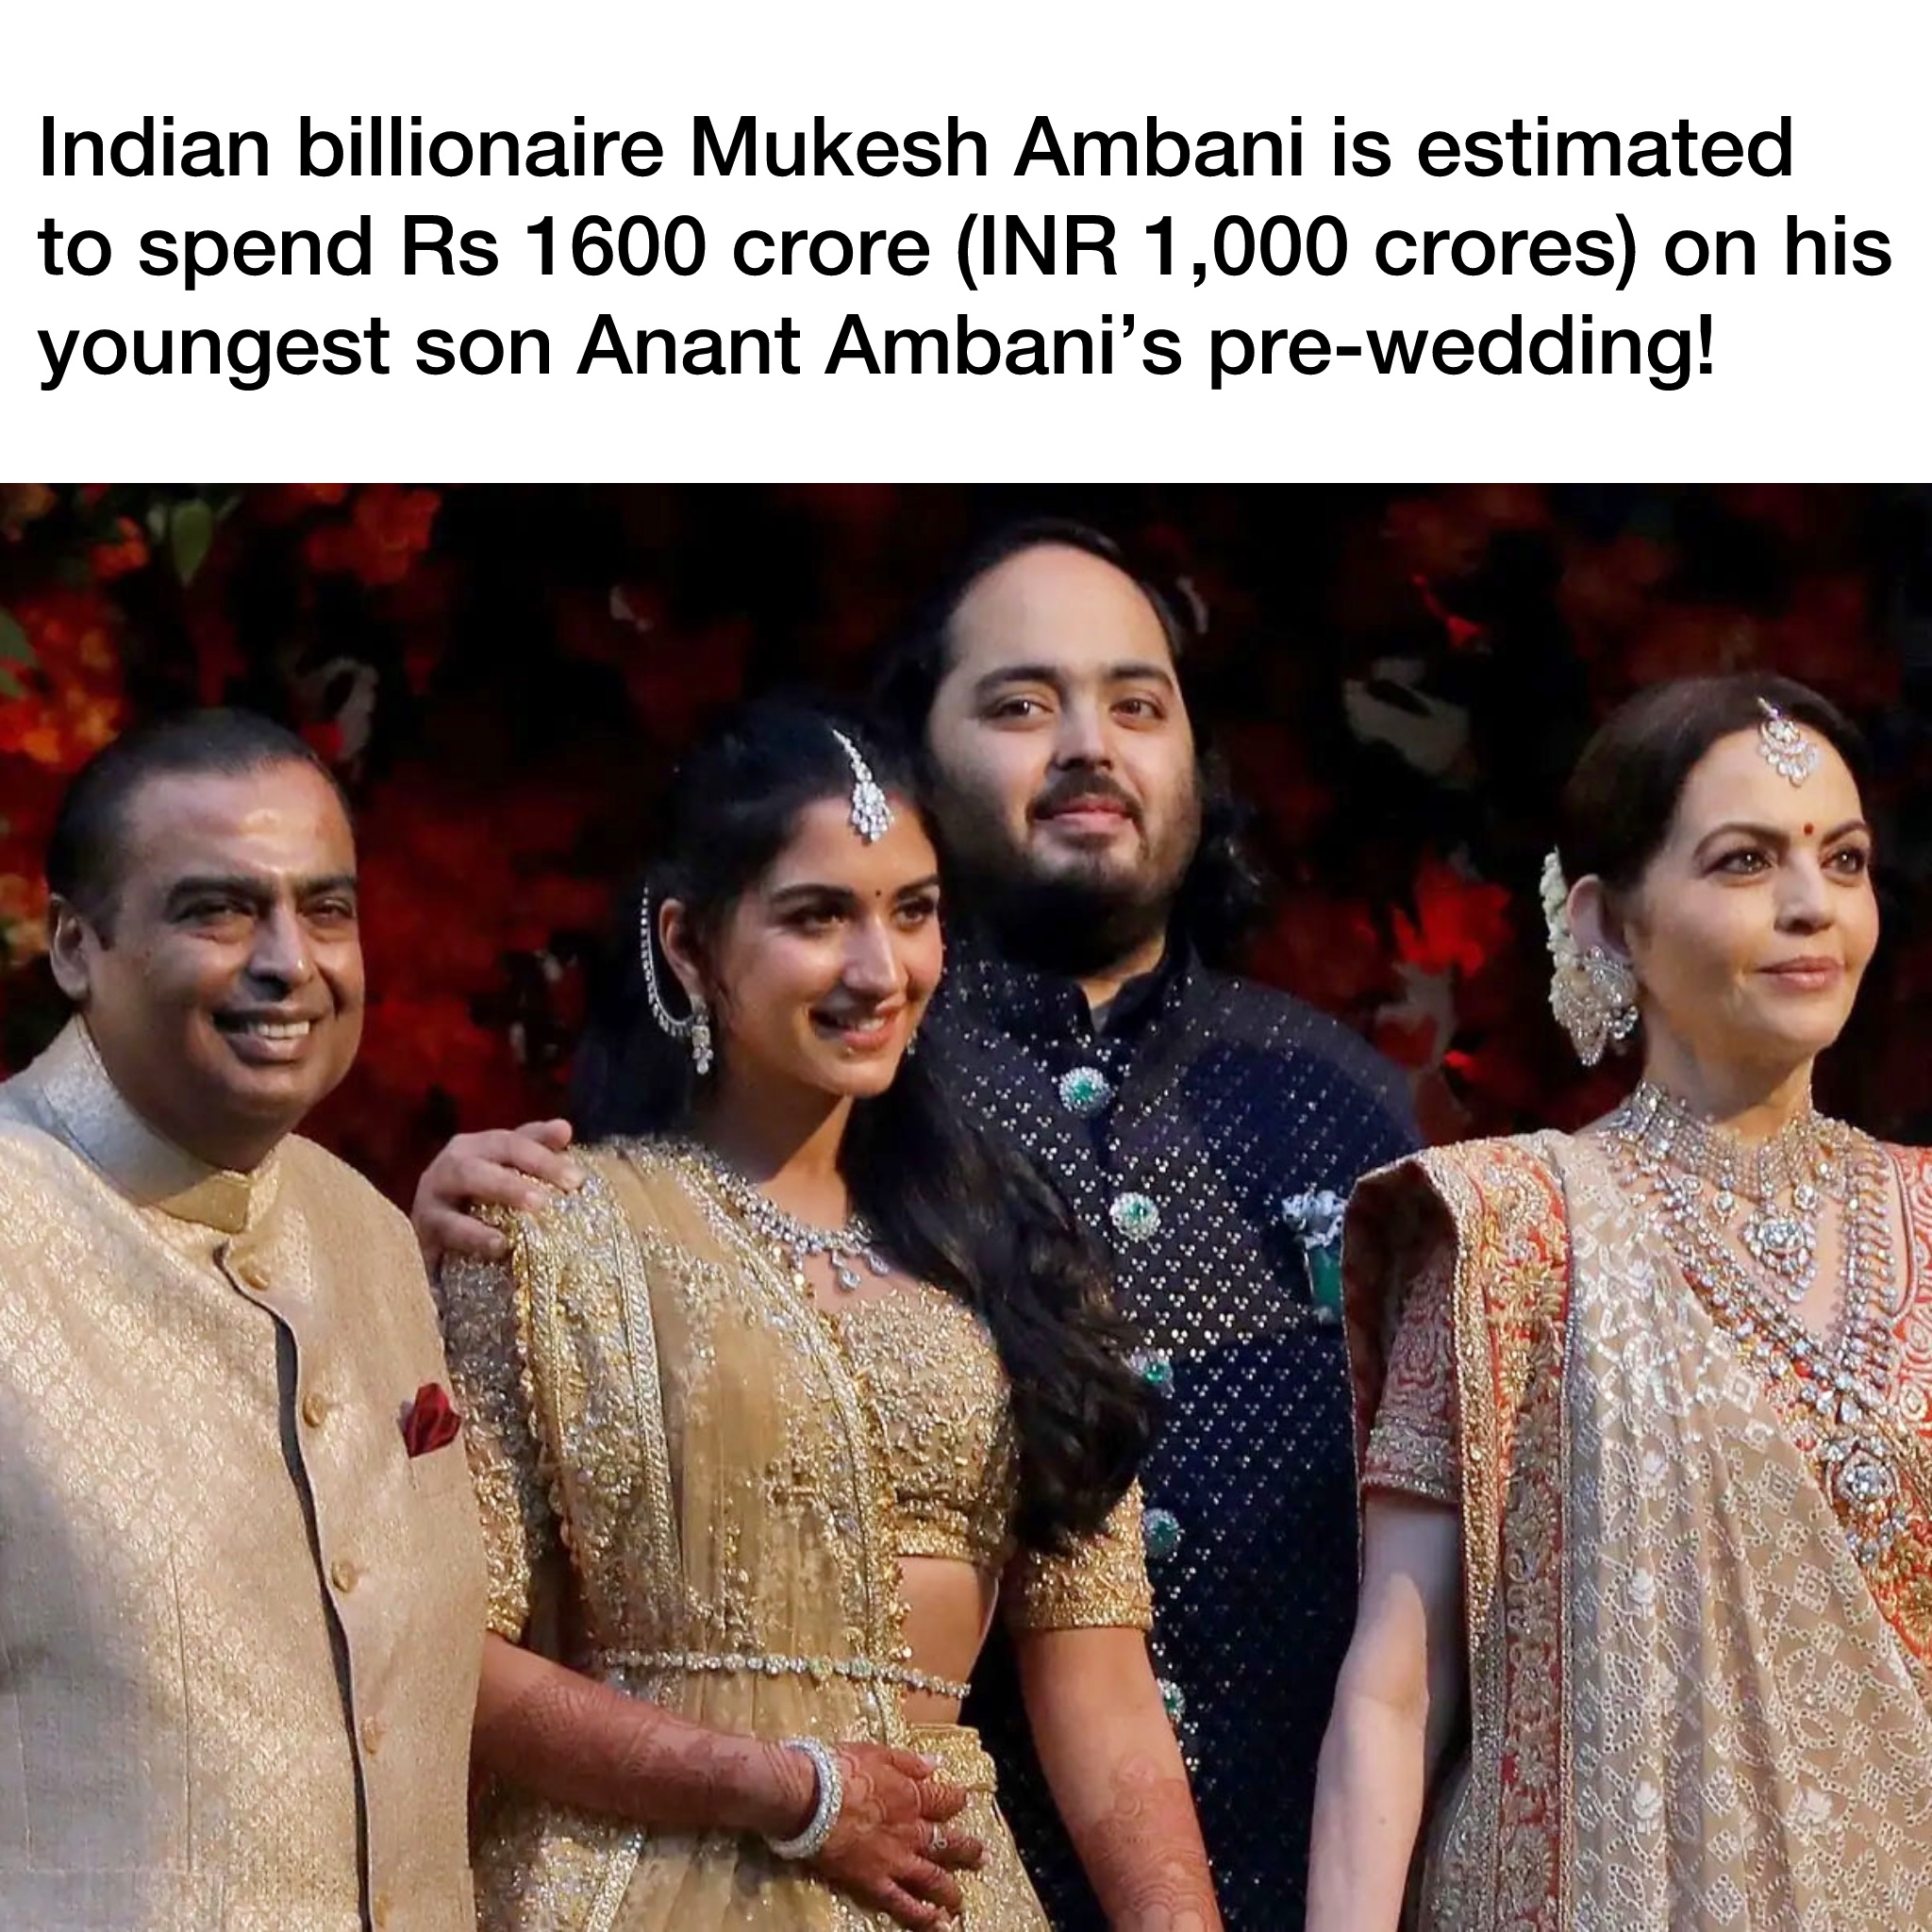 Ambanis To Spend NPR 1600 on his Youngest Son’s Pre Wedding Festival